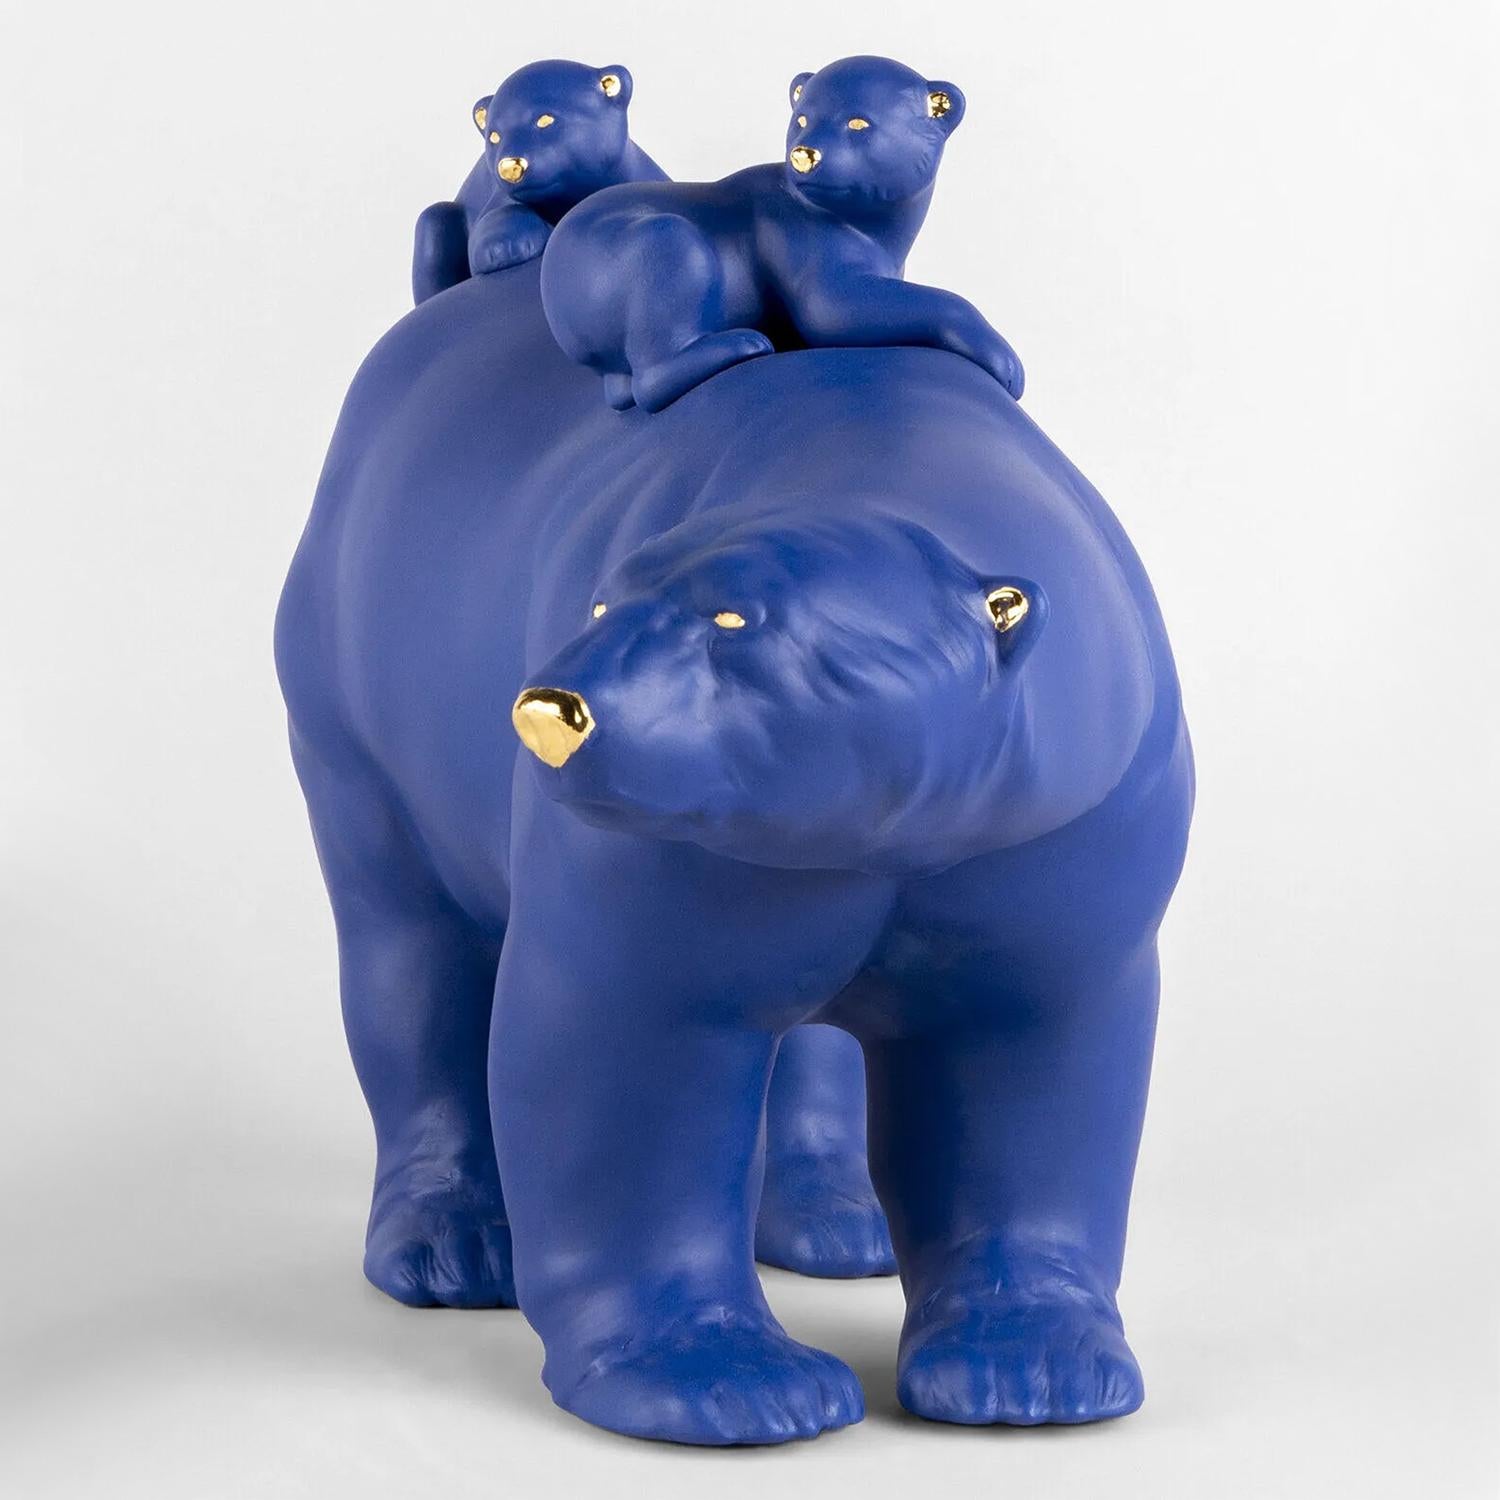 Sculpture Polar Bear Family with all structure in 
porcelain in blue matte and shiny gold finish.